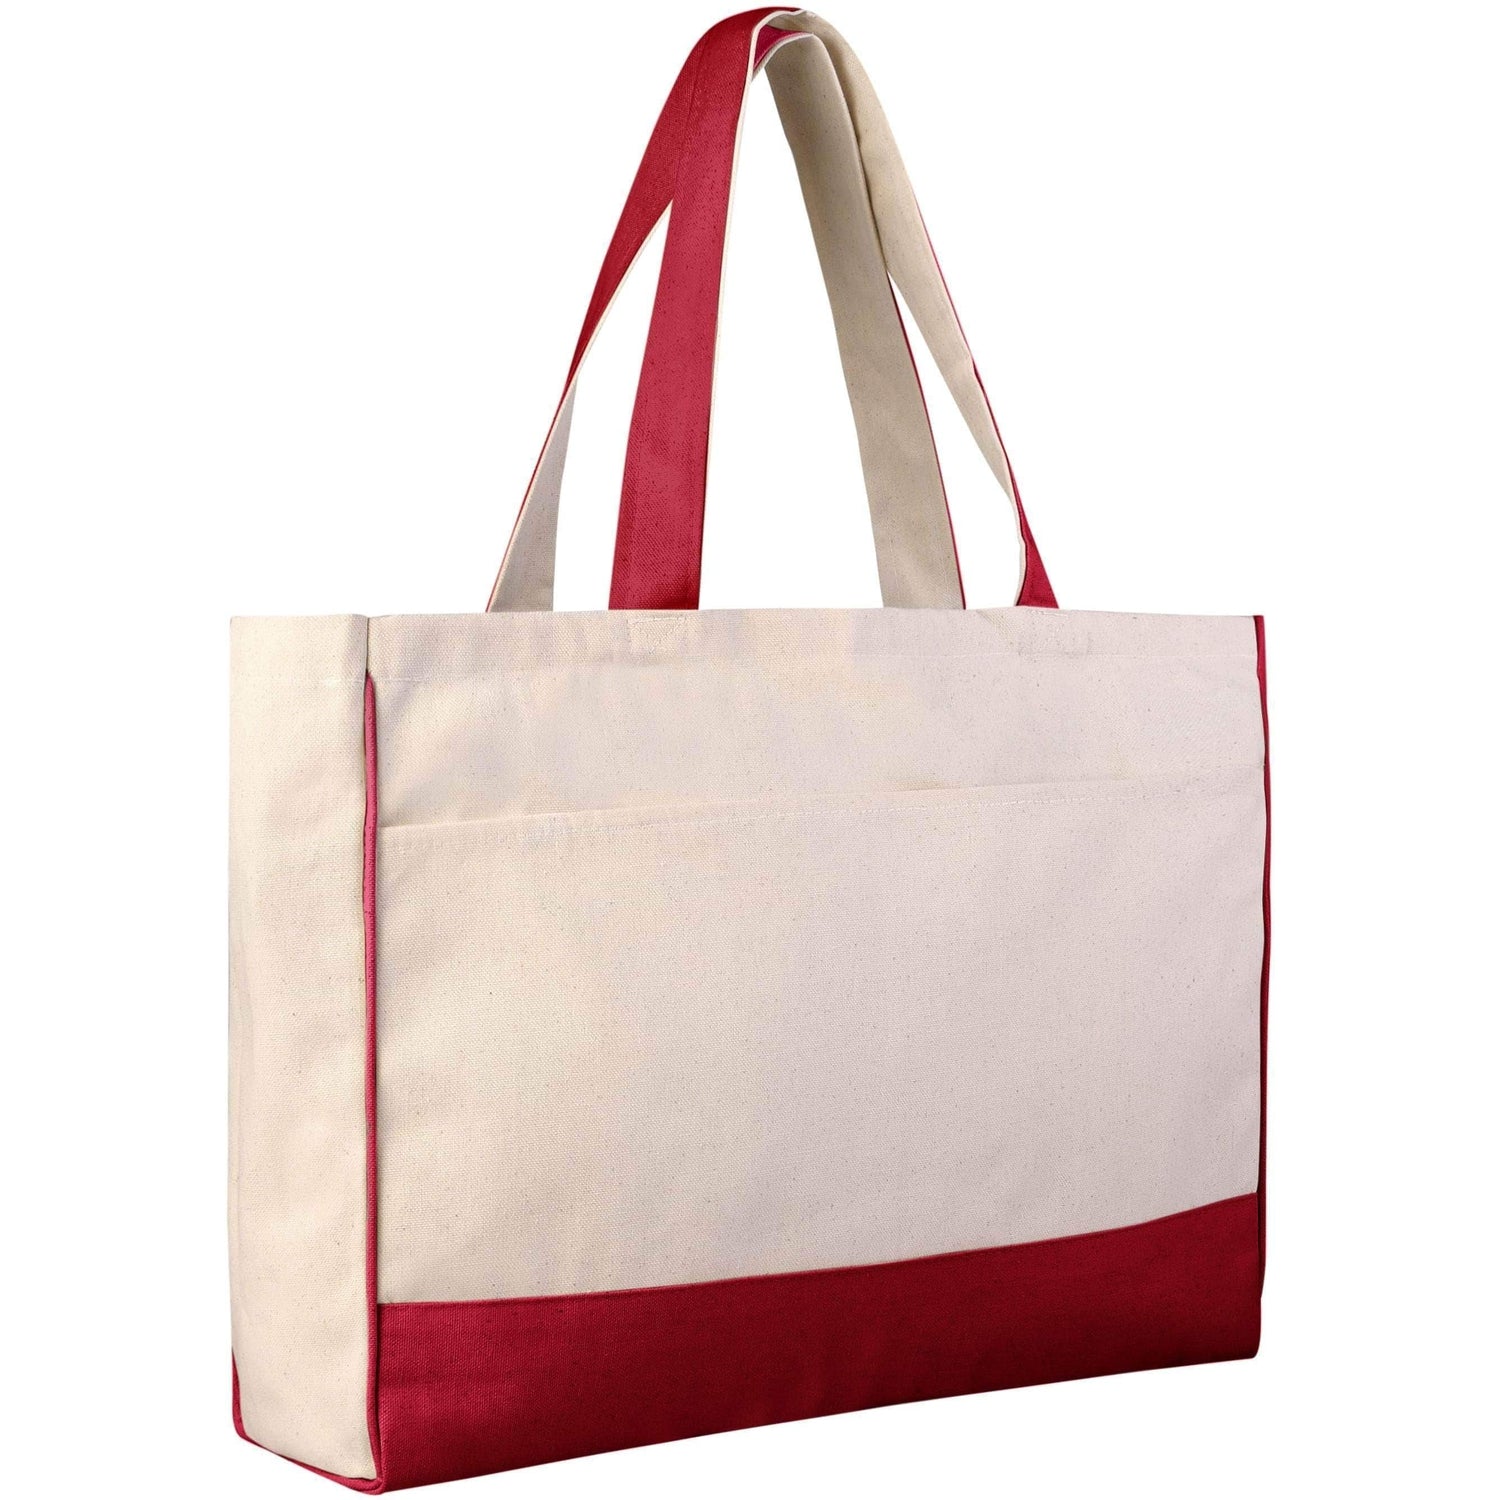 Canvas Tote Bags Wholesale, Large Canvas Tote Bag with Zipper Pocket – BagzDepot™